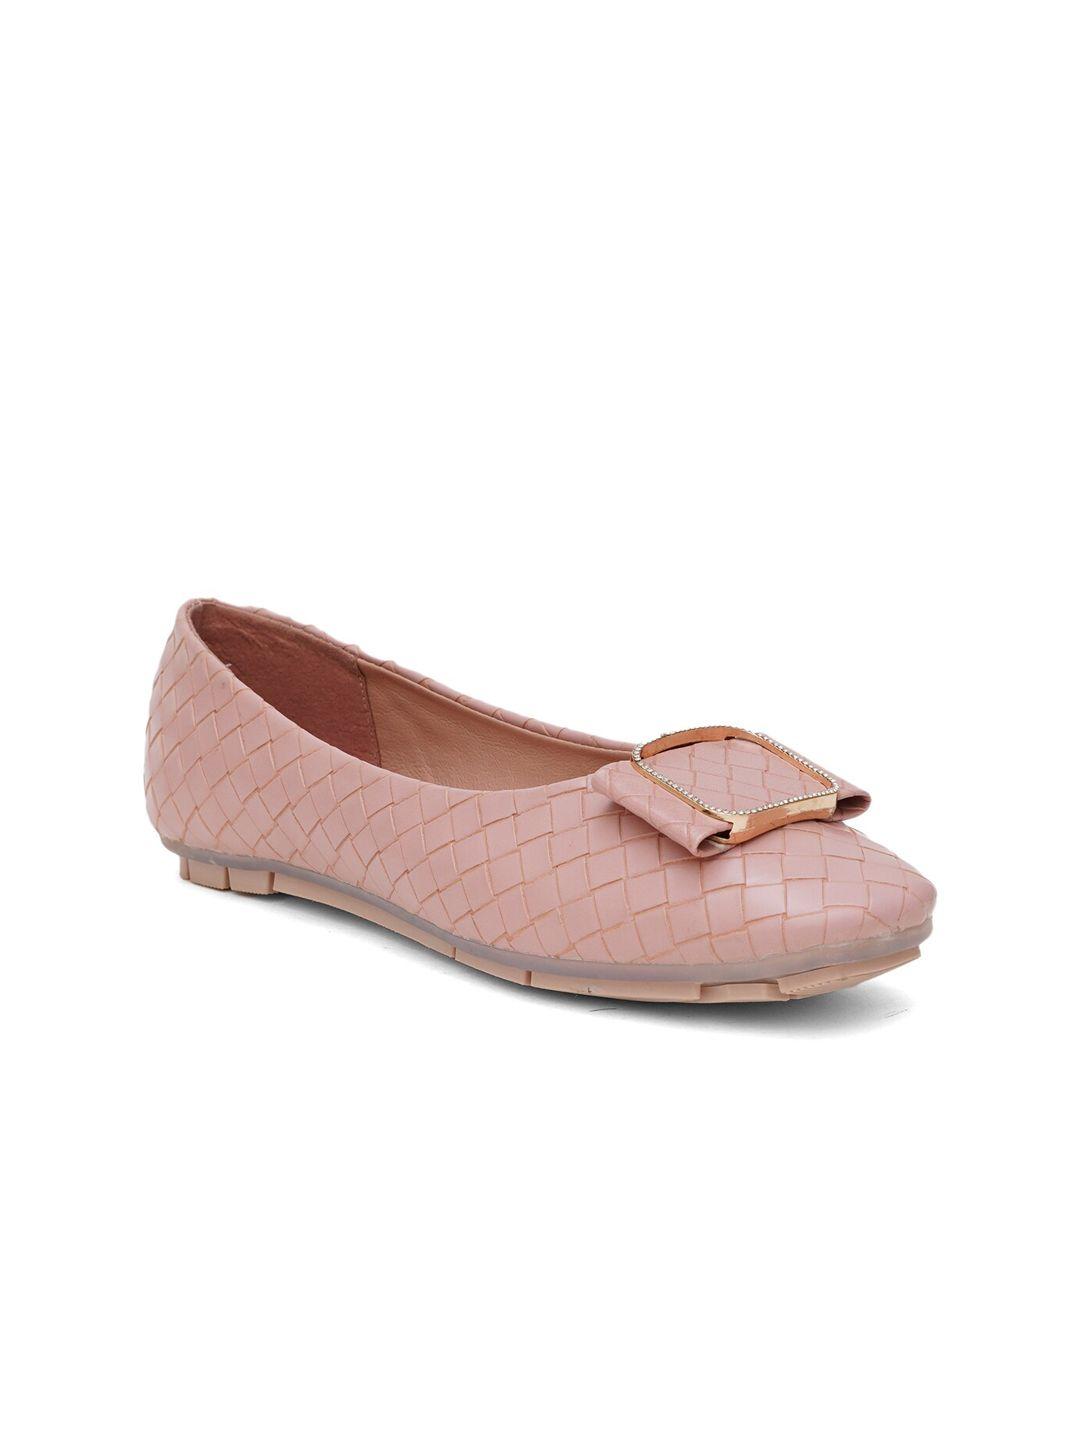 sherrif shoes textured square toe ballerinas with bows